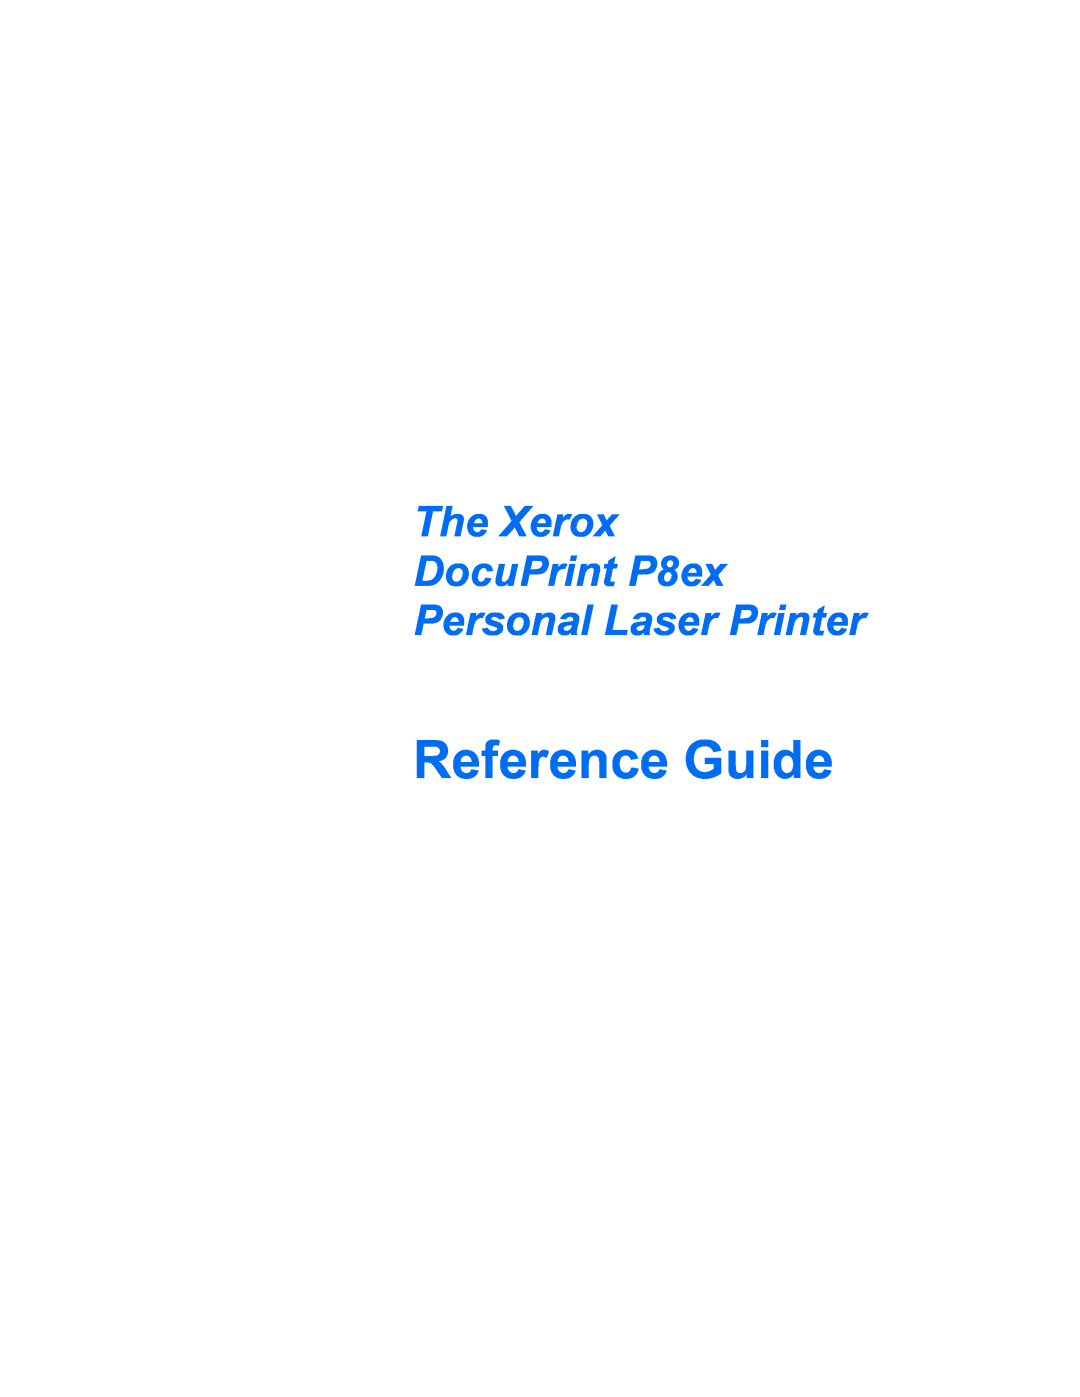 Xerox manual The Xerox DocuPrint P8ex Personal Laser Printer, Reference Guide 